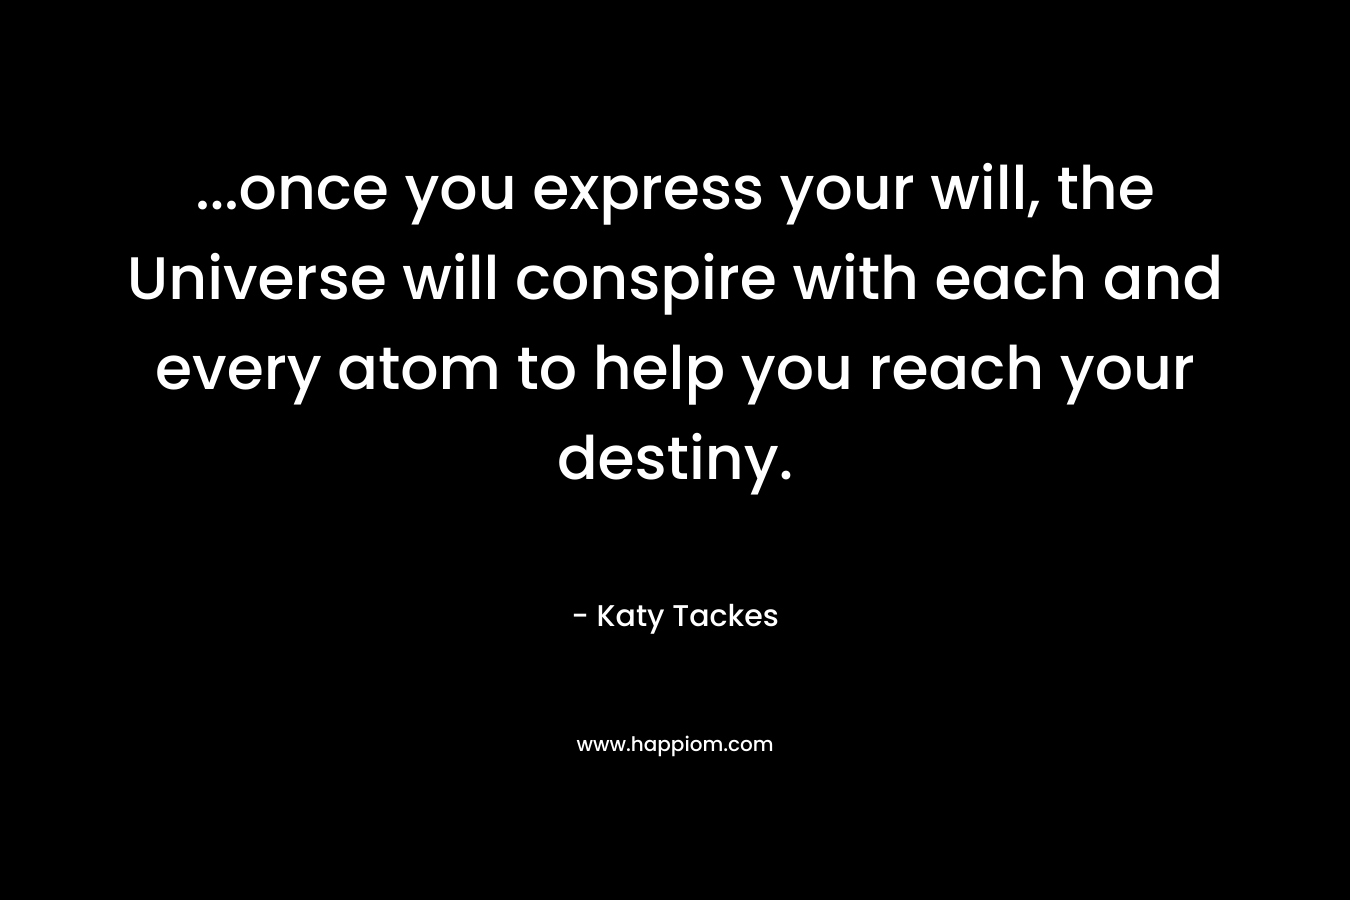 ...once you express your will, the Universe will conspire with each and every atom to help you reach your destiny.